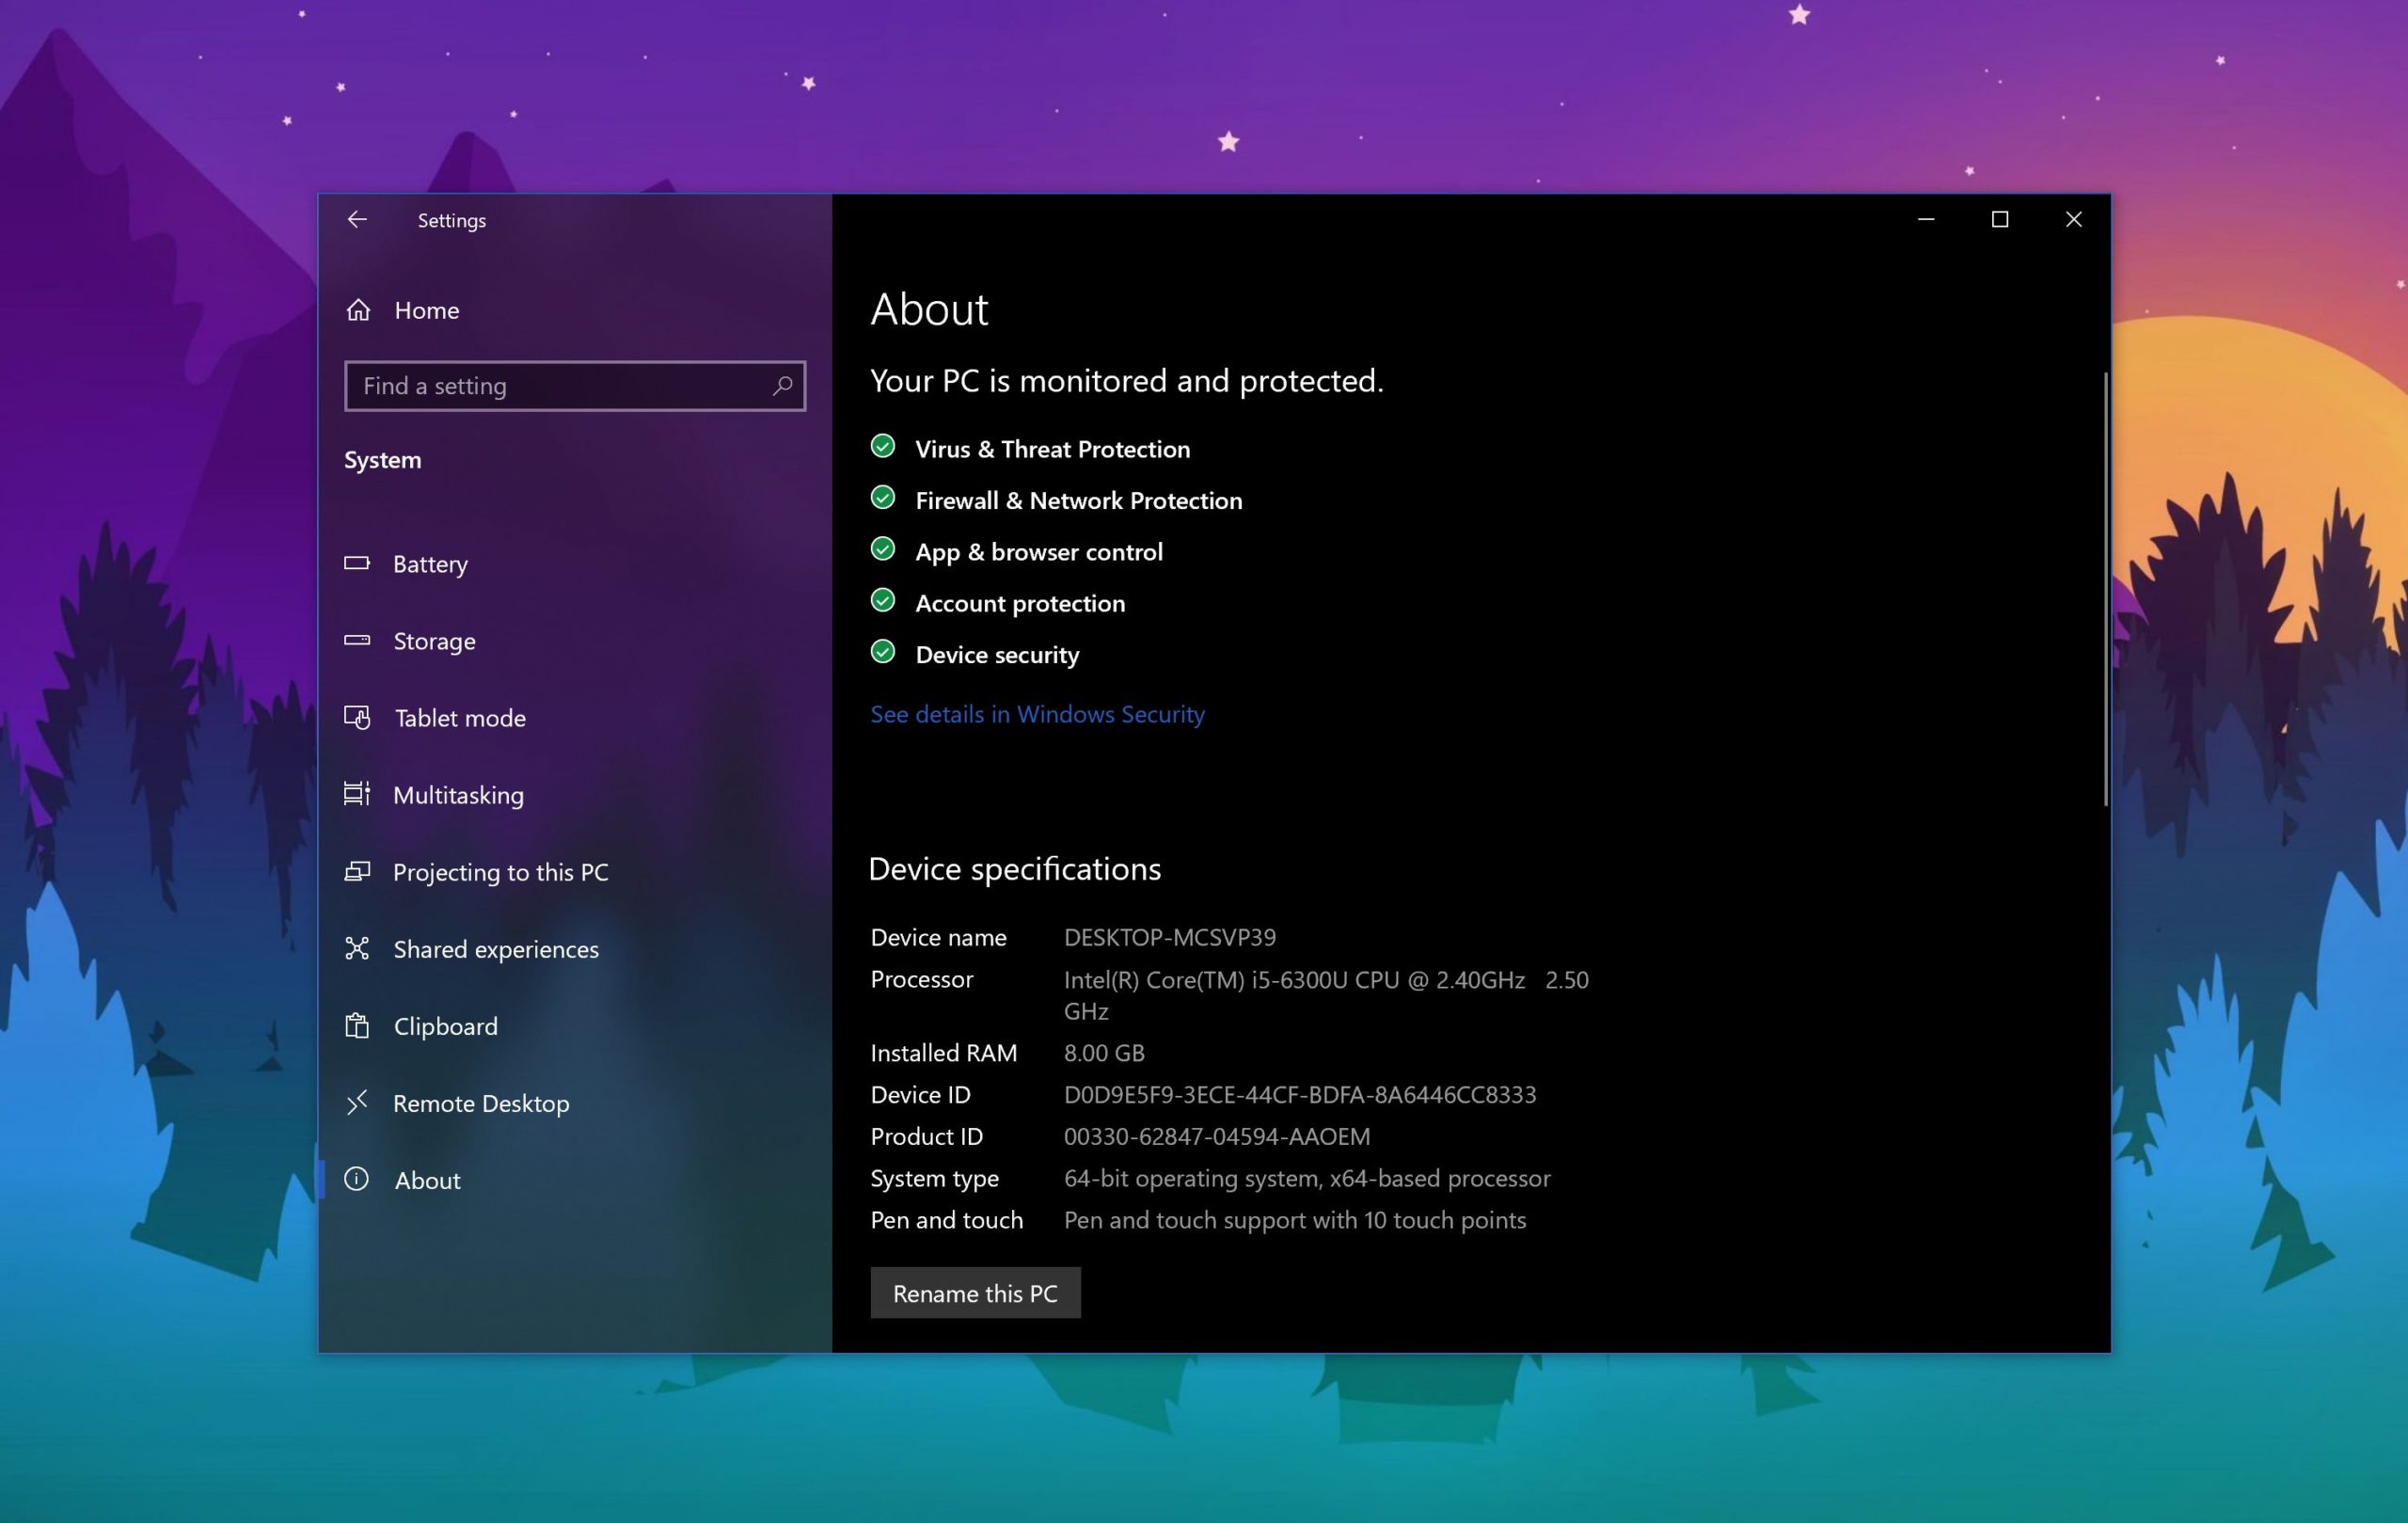 How Microsoft Is Redesigning the Windows 10 About Screen